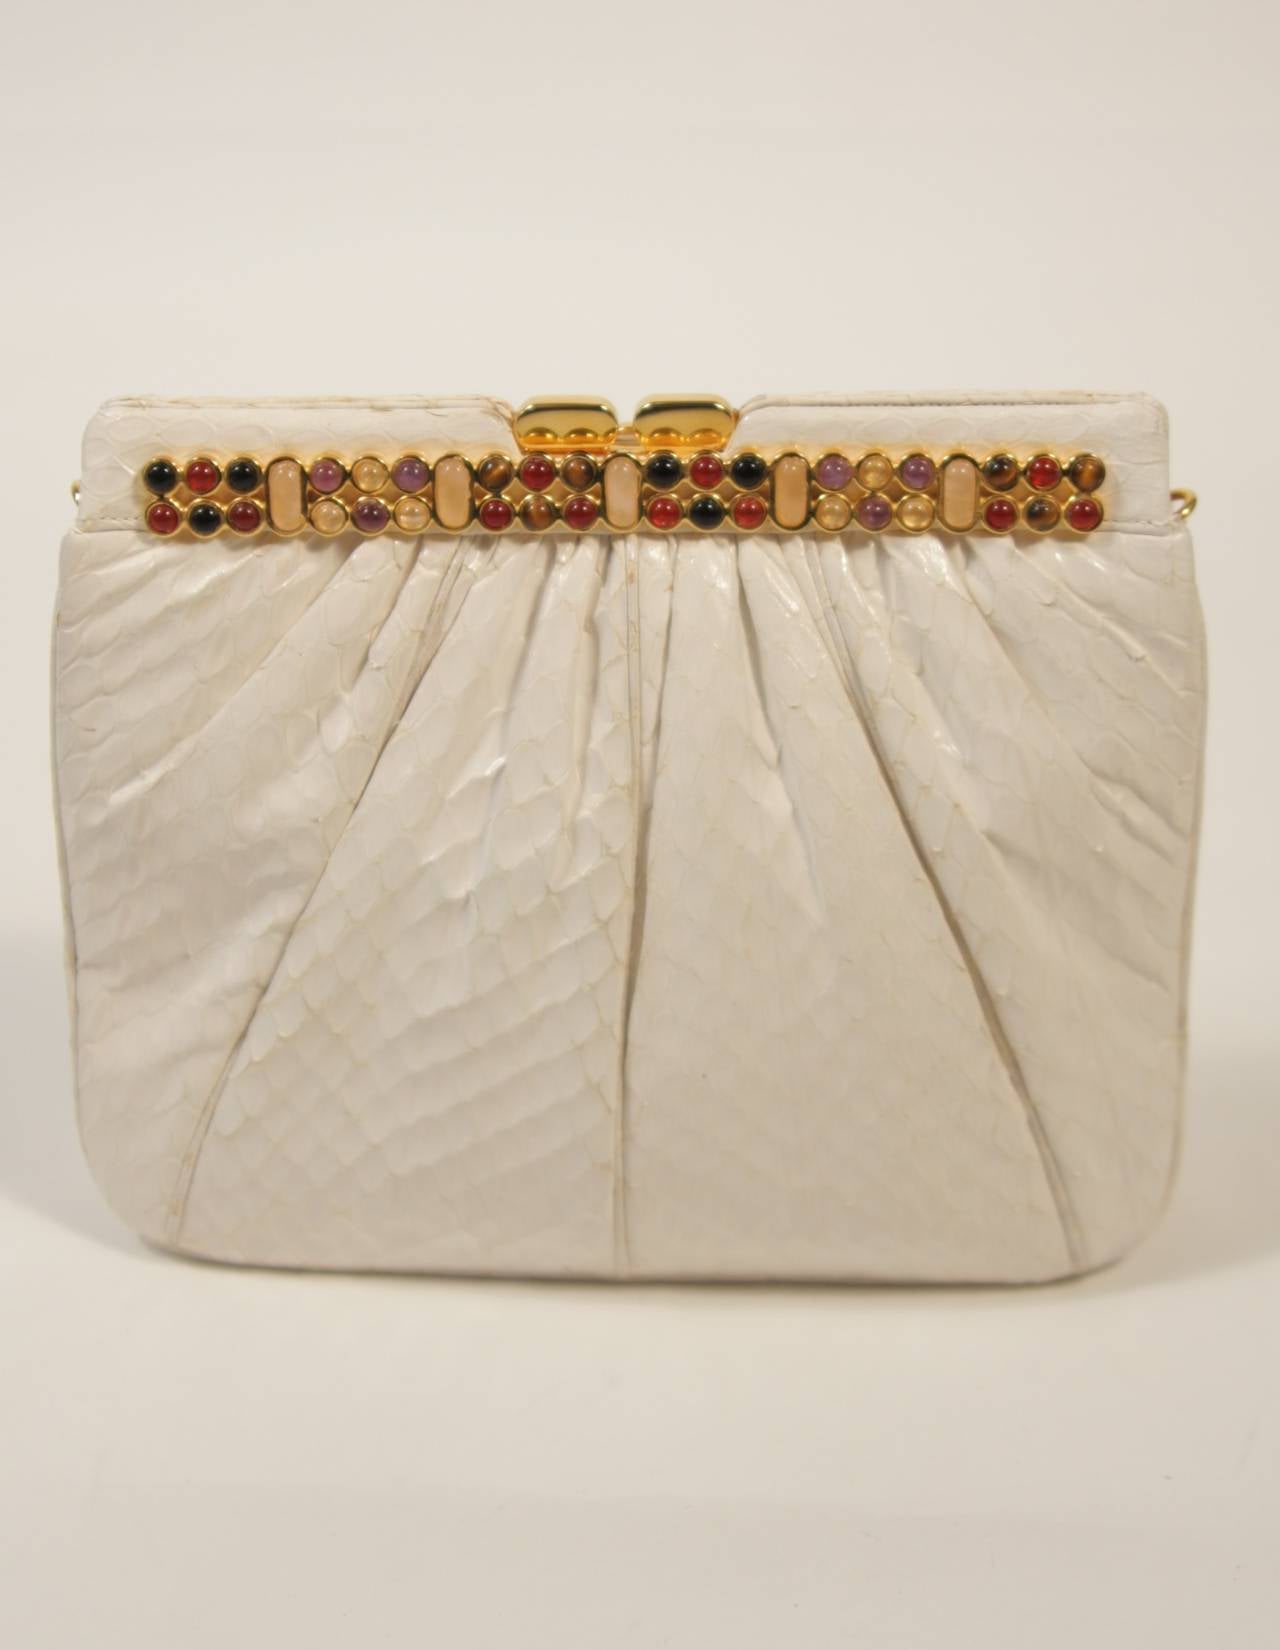 This vintage Judith Leiber handbag is composed of a white gathered snakeskin. The frame style clutch is adorned with multiple colored stones. In excellent condition, there is some slight natural yellowing of the skin in certain areas, due to age.